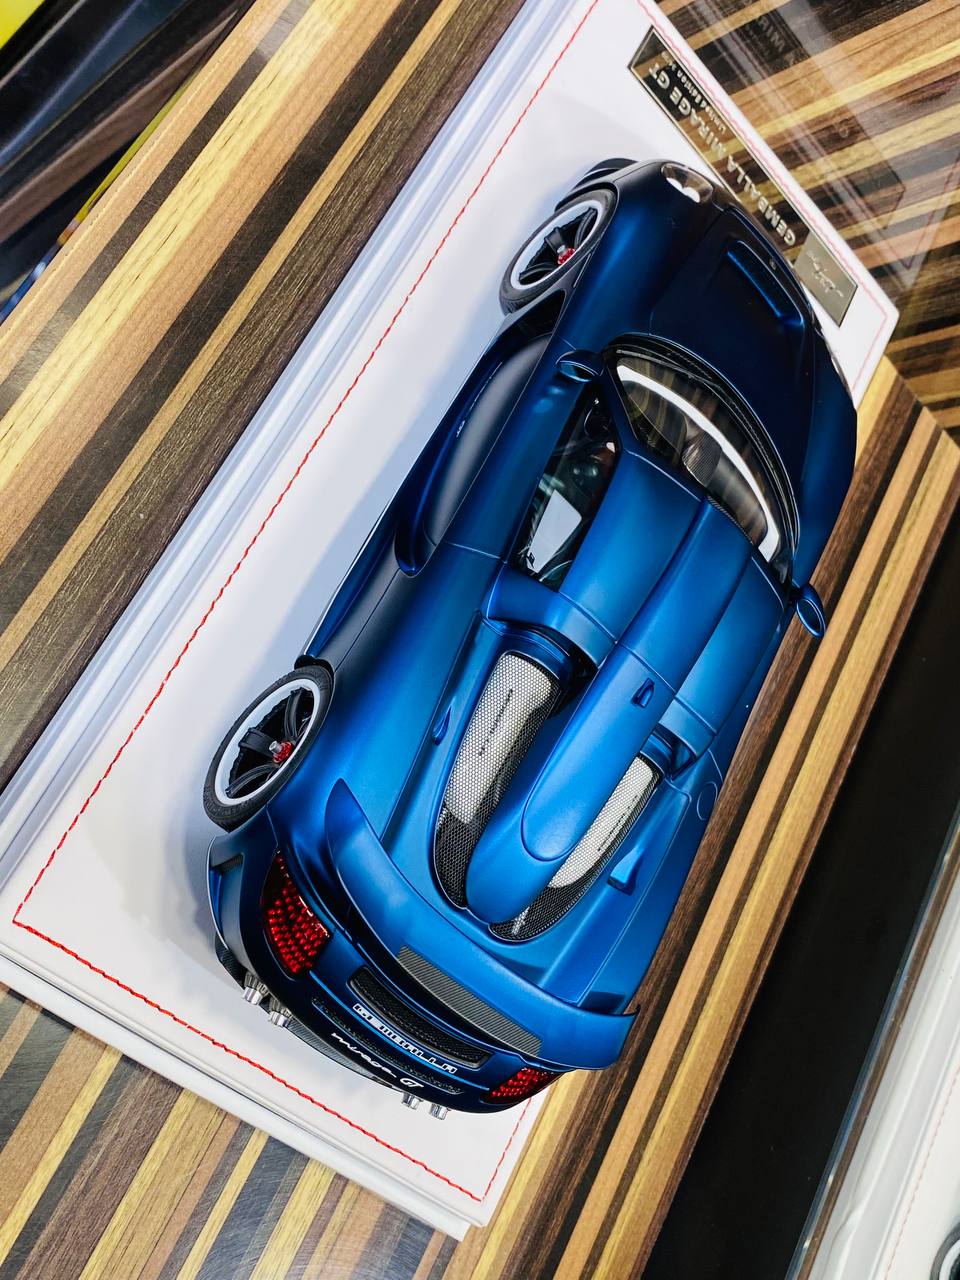 Exclusive IVY Models Gemballa MIRAGE GT Resin Model - Matte Blue | Limited Edition!